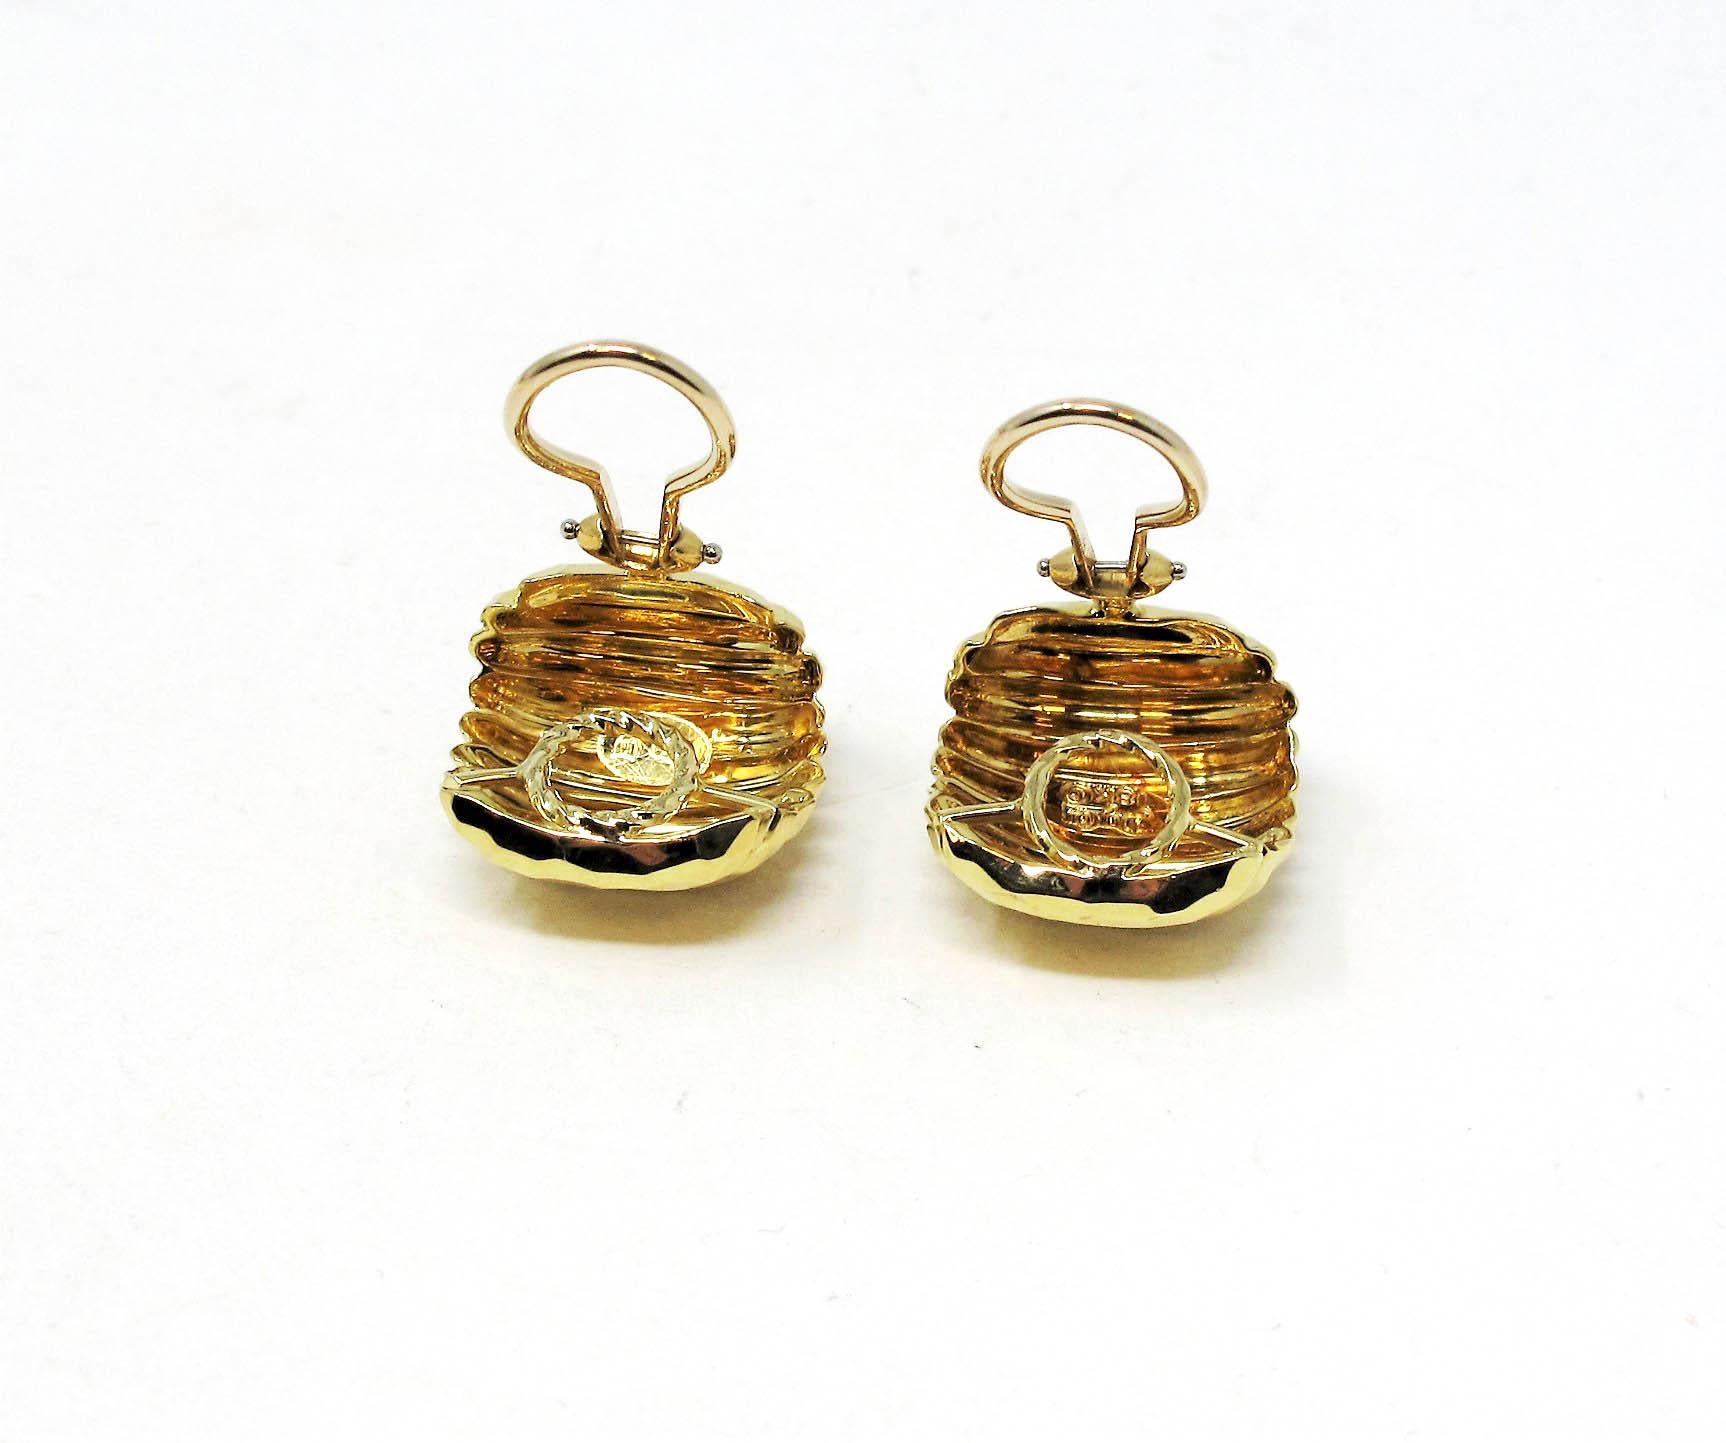 Henry Dunay Hammered Ridged 18 Karat Yellow Gold Clip-On Earrings In Good Condition For Sale In Scottsdale, AZ